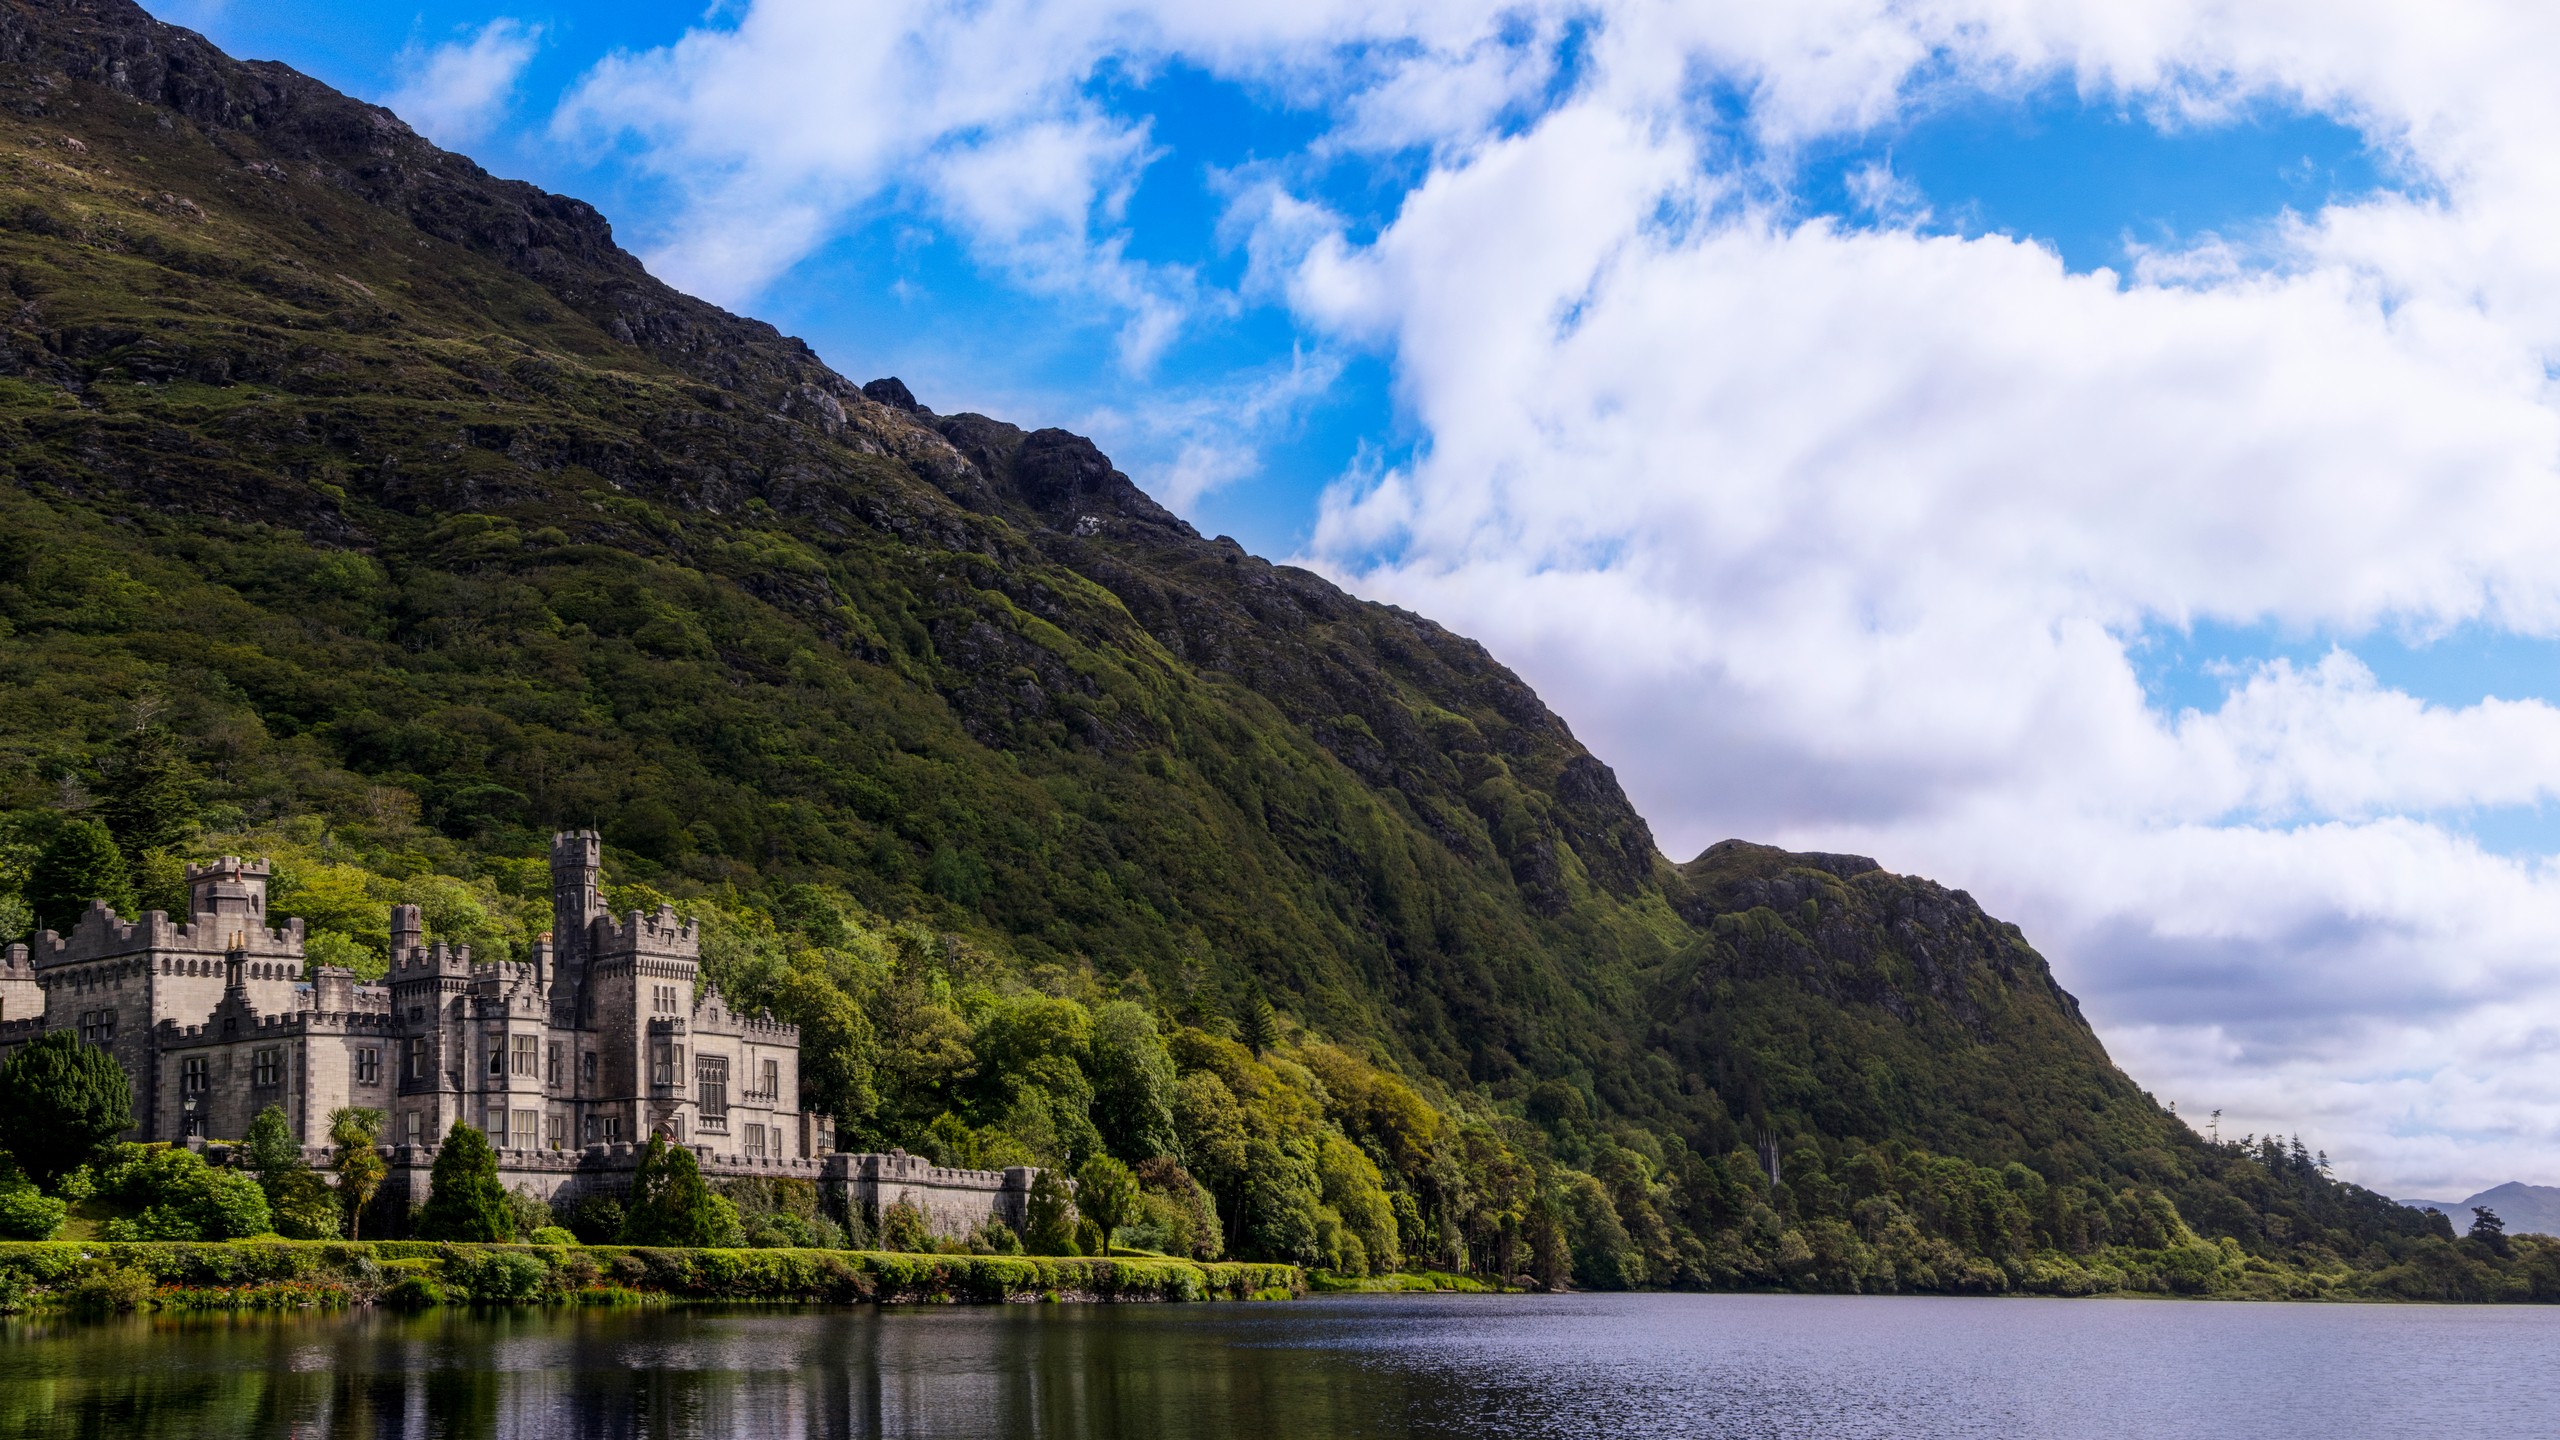 Kylemore Abbey Wallpapers